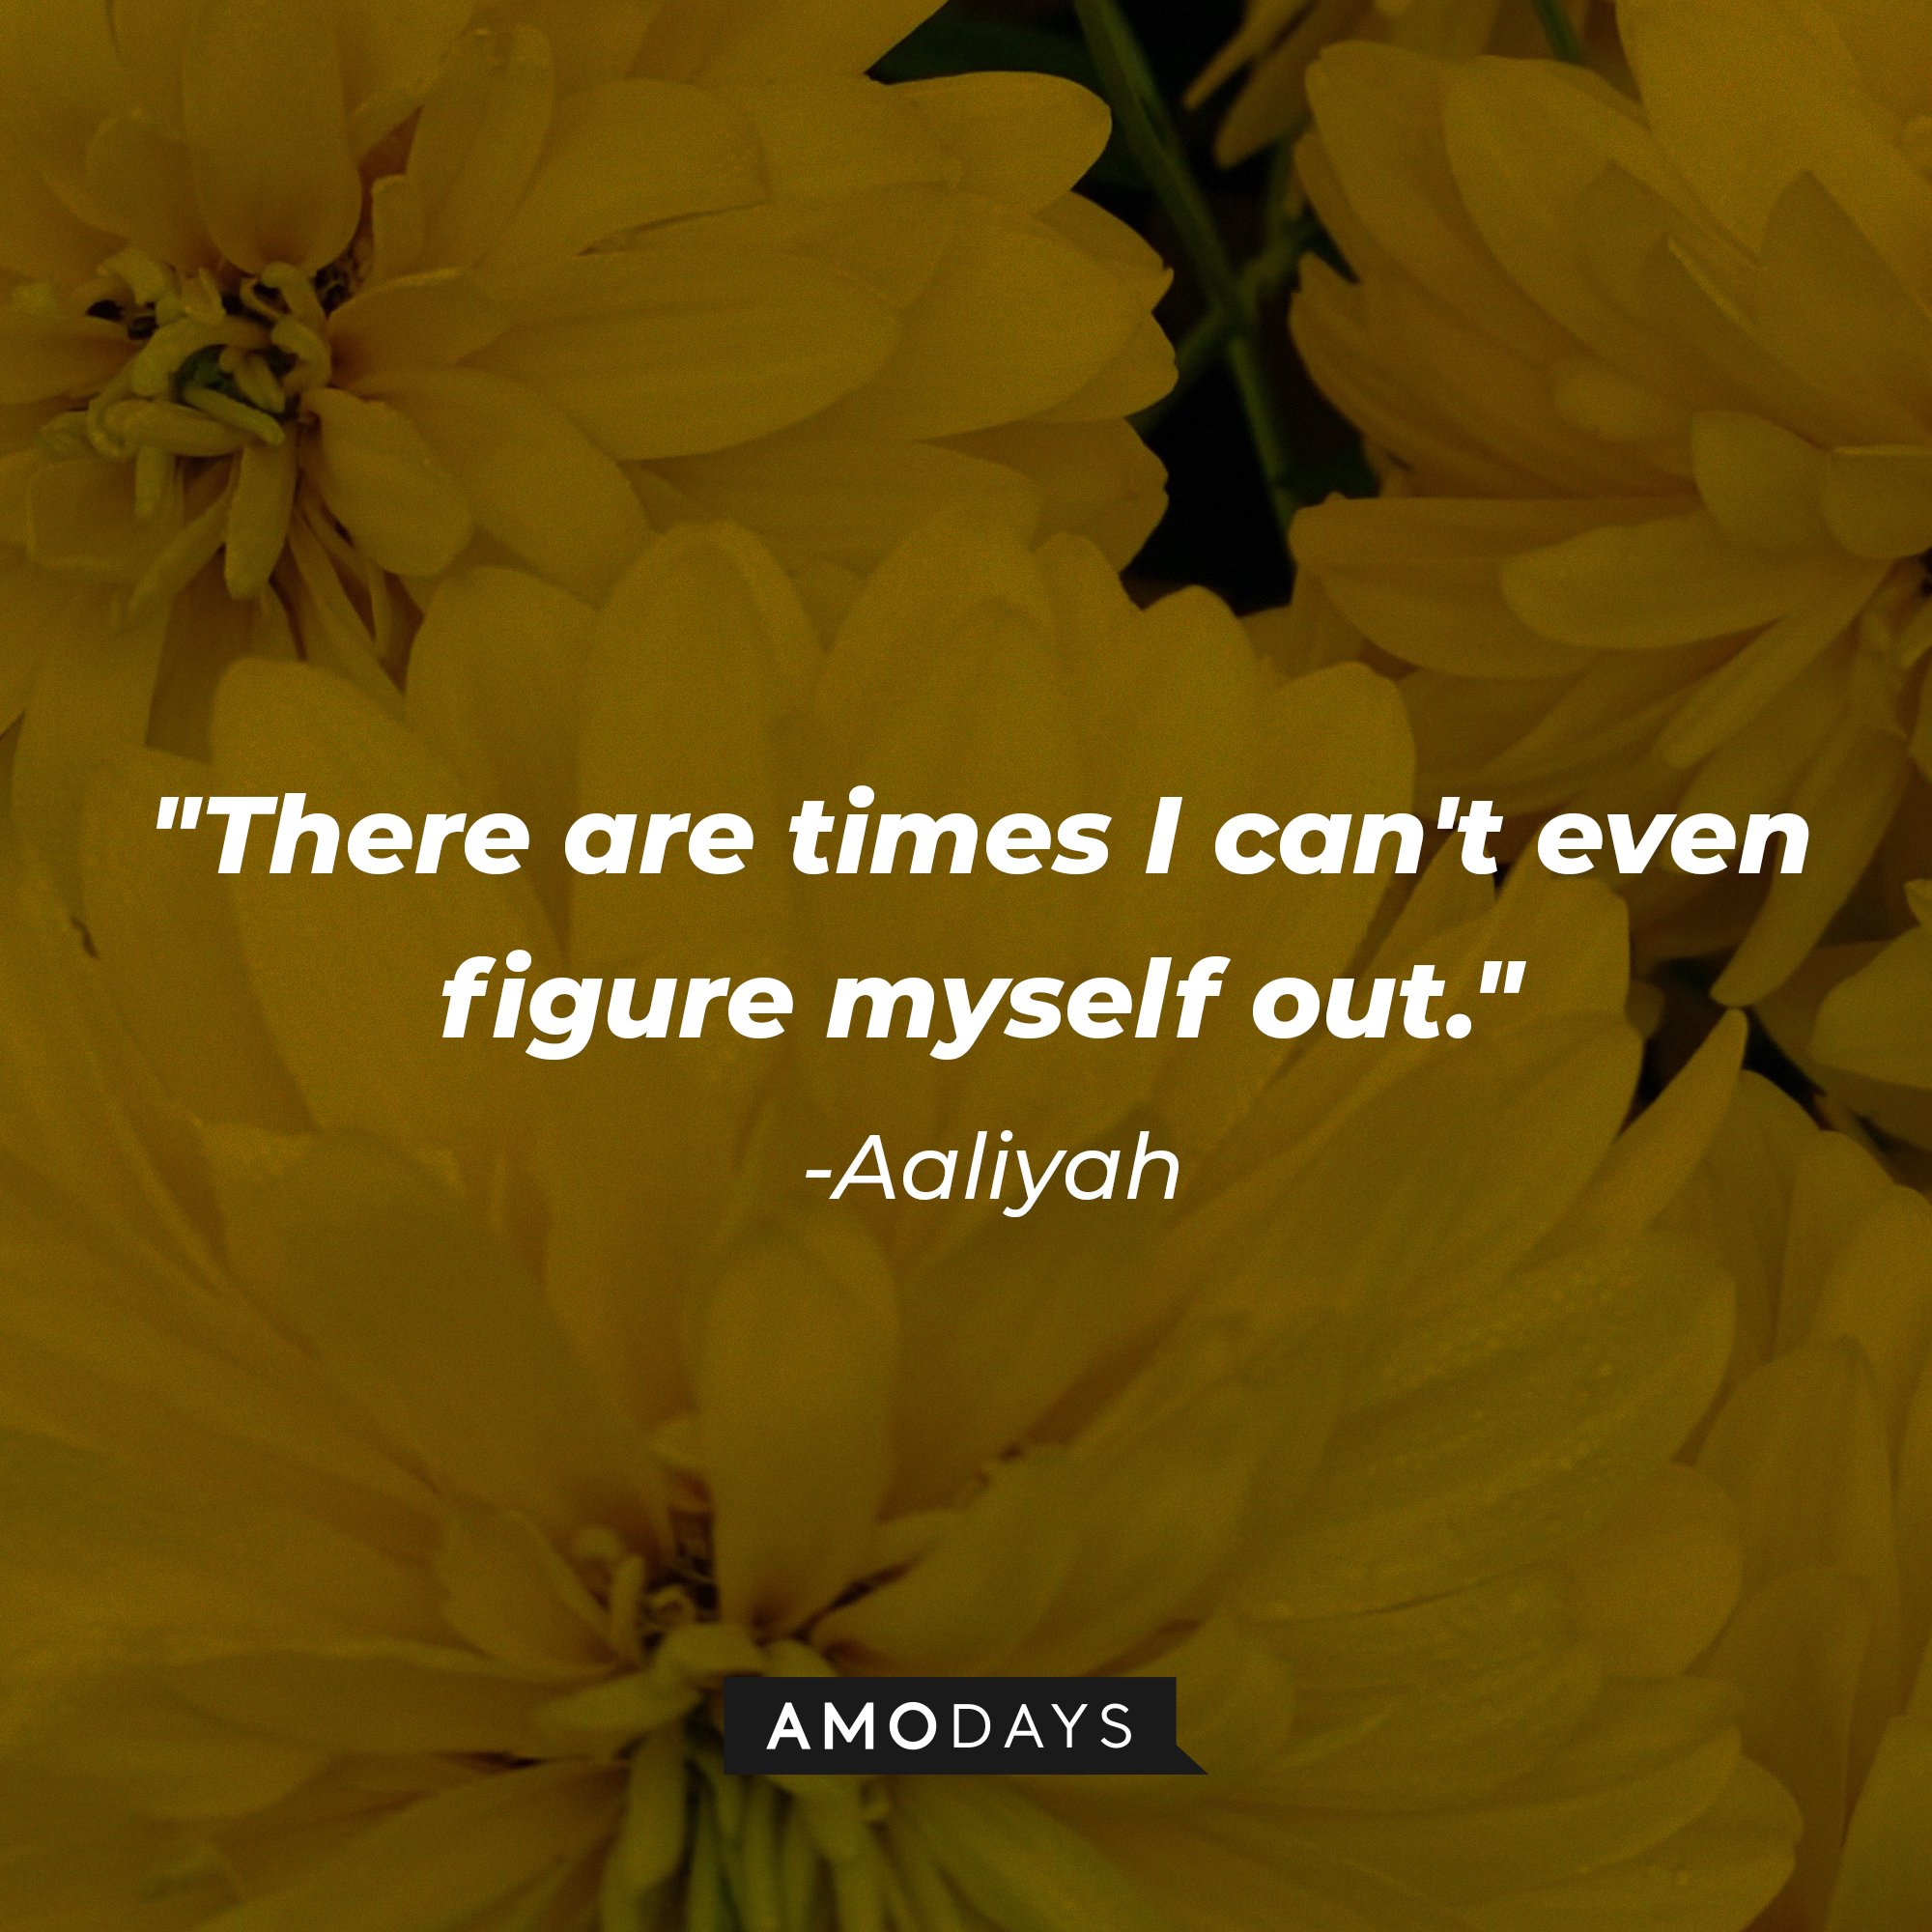 Aaliyah’s quote: "There are times I can't even figure myself out." | Image: AmoDays